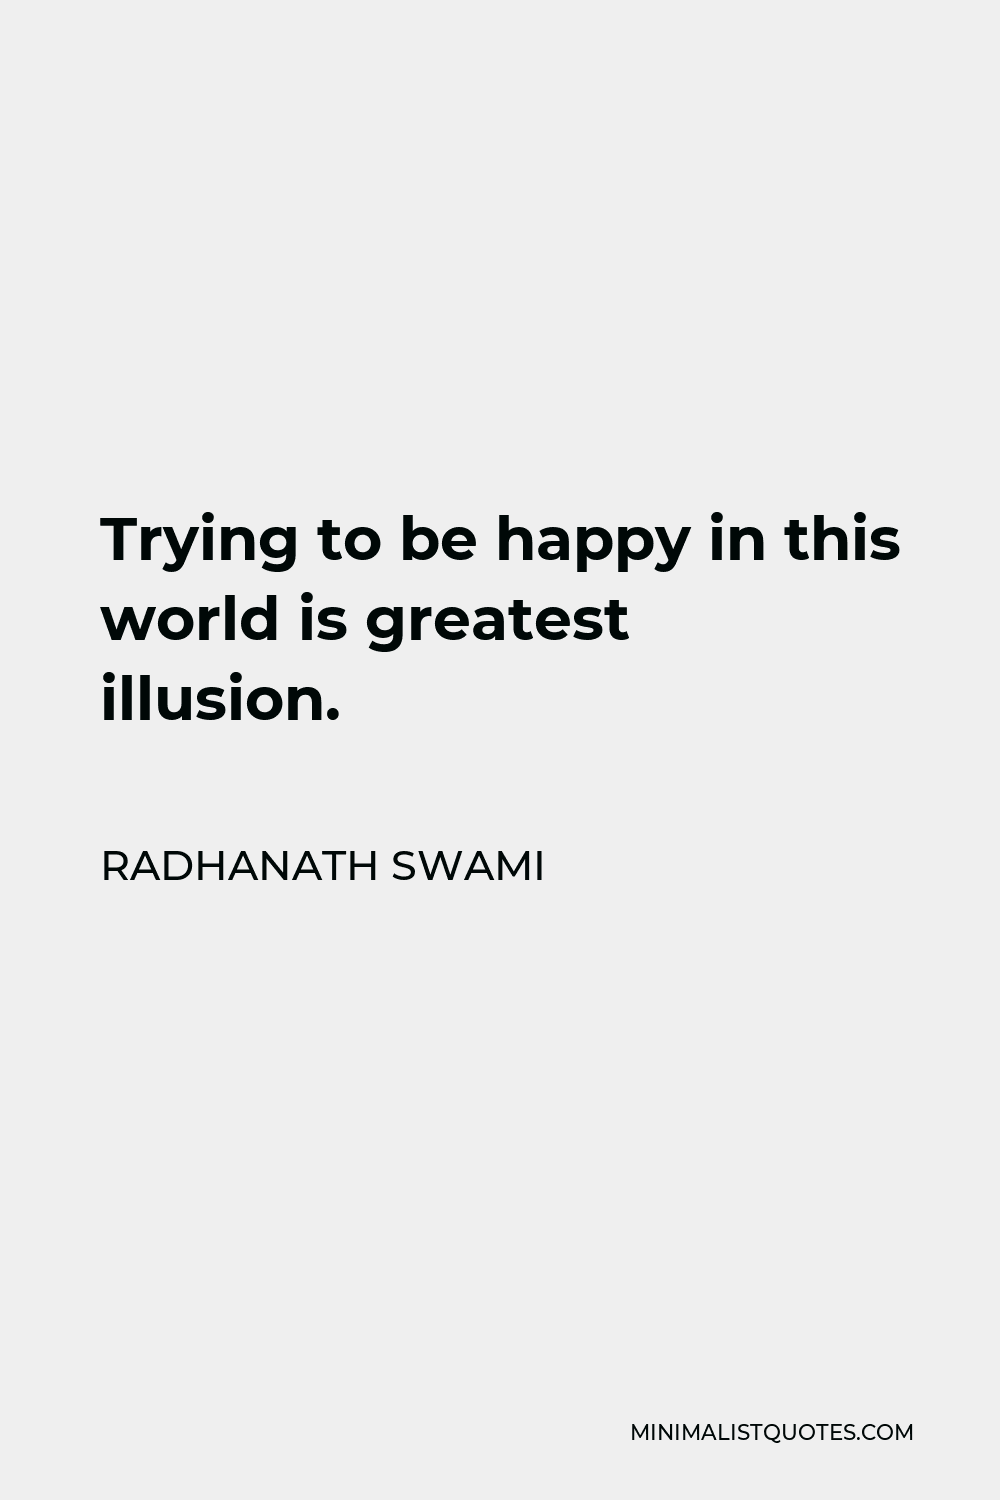 Radhanath Swami Quote - Trying to be happy in this world is greatest illusion.